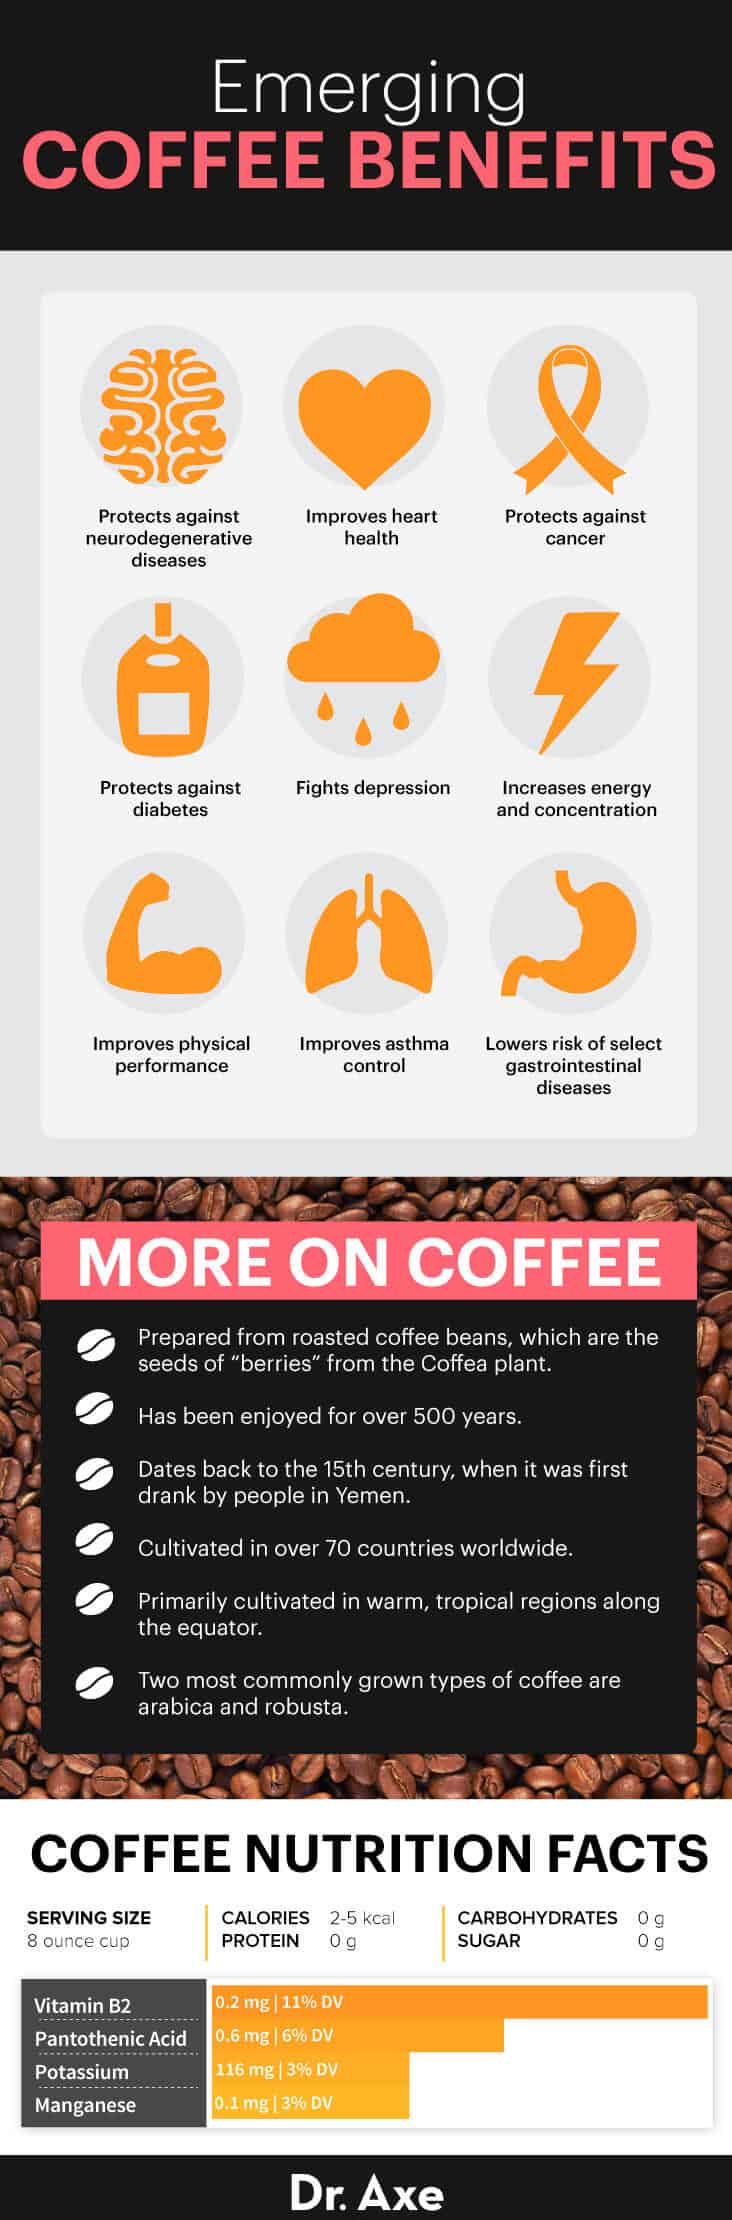 Coffee benefits infographic - Dr. Axe